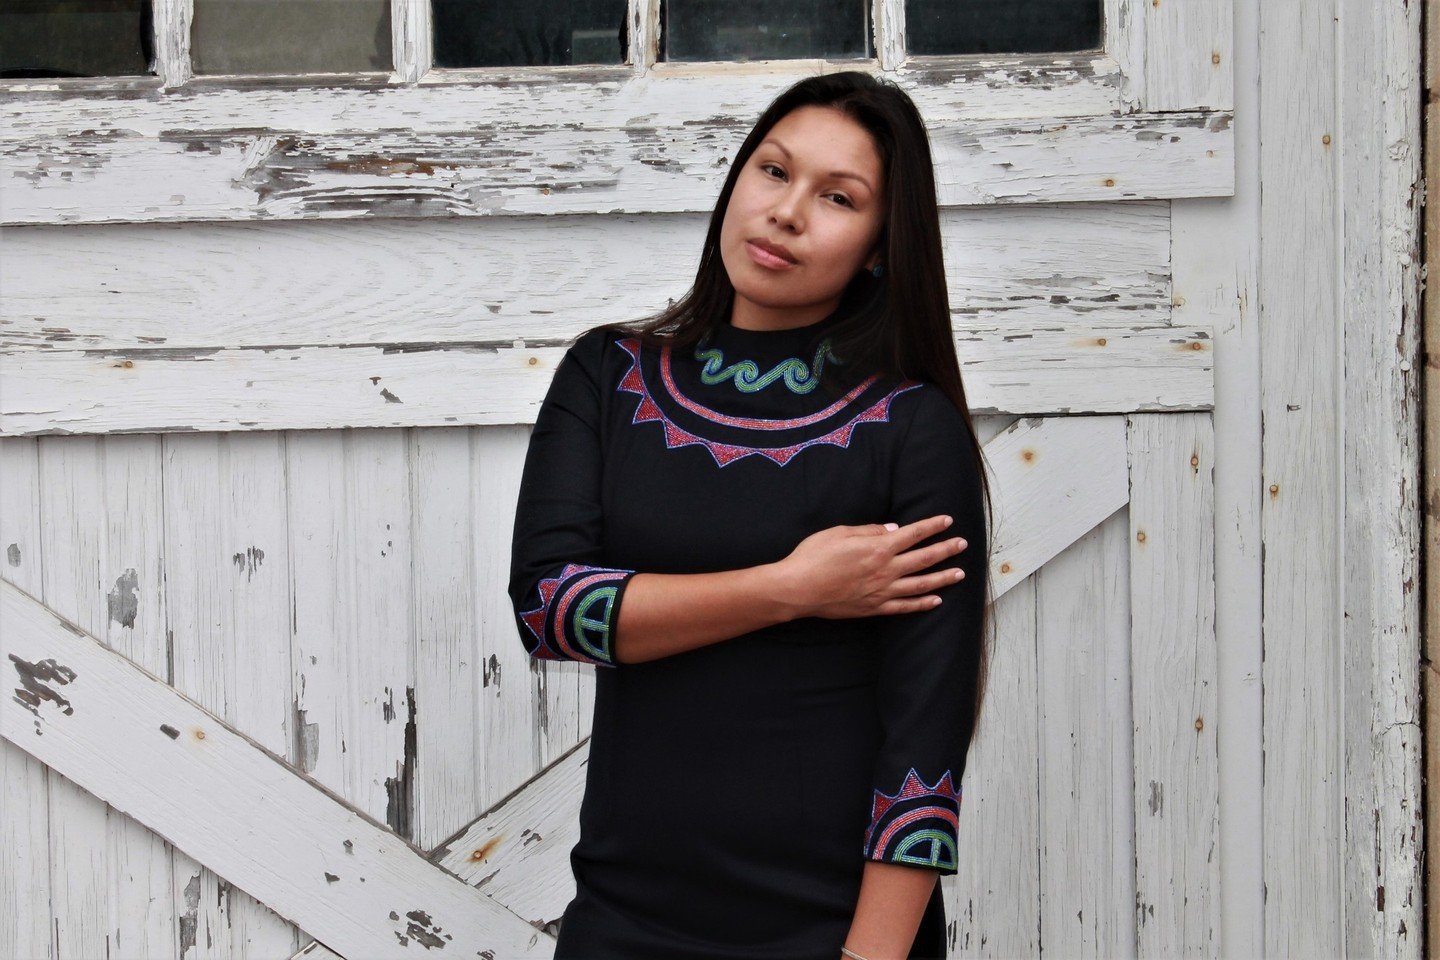 This one-of-a-kind wool crepe dress was specially crafted to feature hand-beaded sun circle and wind motifs 💫⁠
⠀⁠
Model: @macyloudthunder⁠
Photo: @kriswilson_602⁠
.⁠
.⁠
.⁠
#handbeaded #nativeart #mvskoke #buynative #muscogee #indigenous #shopsmall #